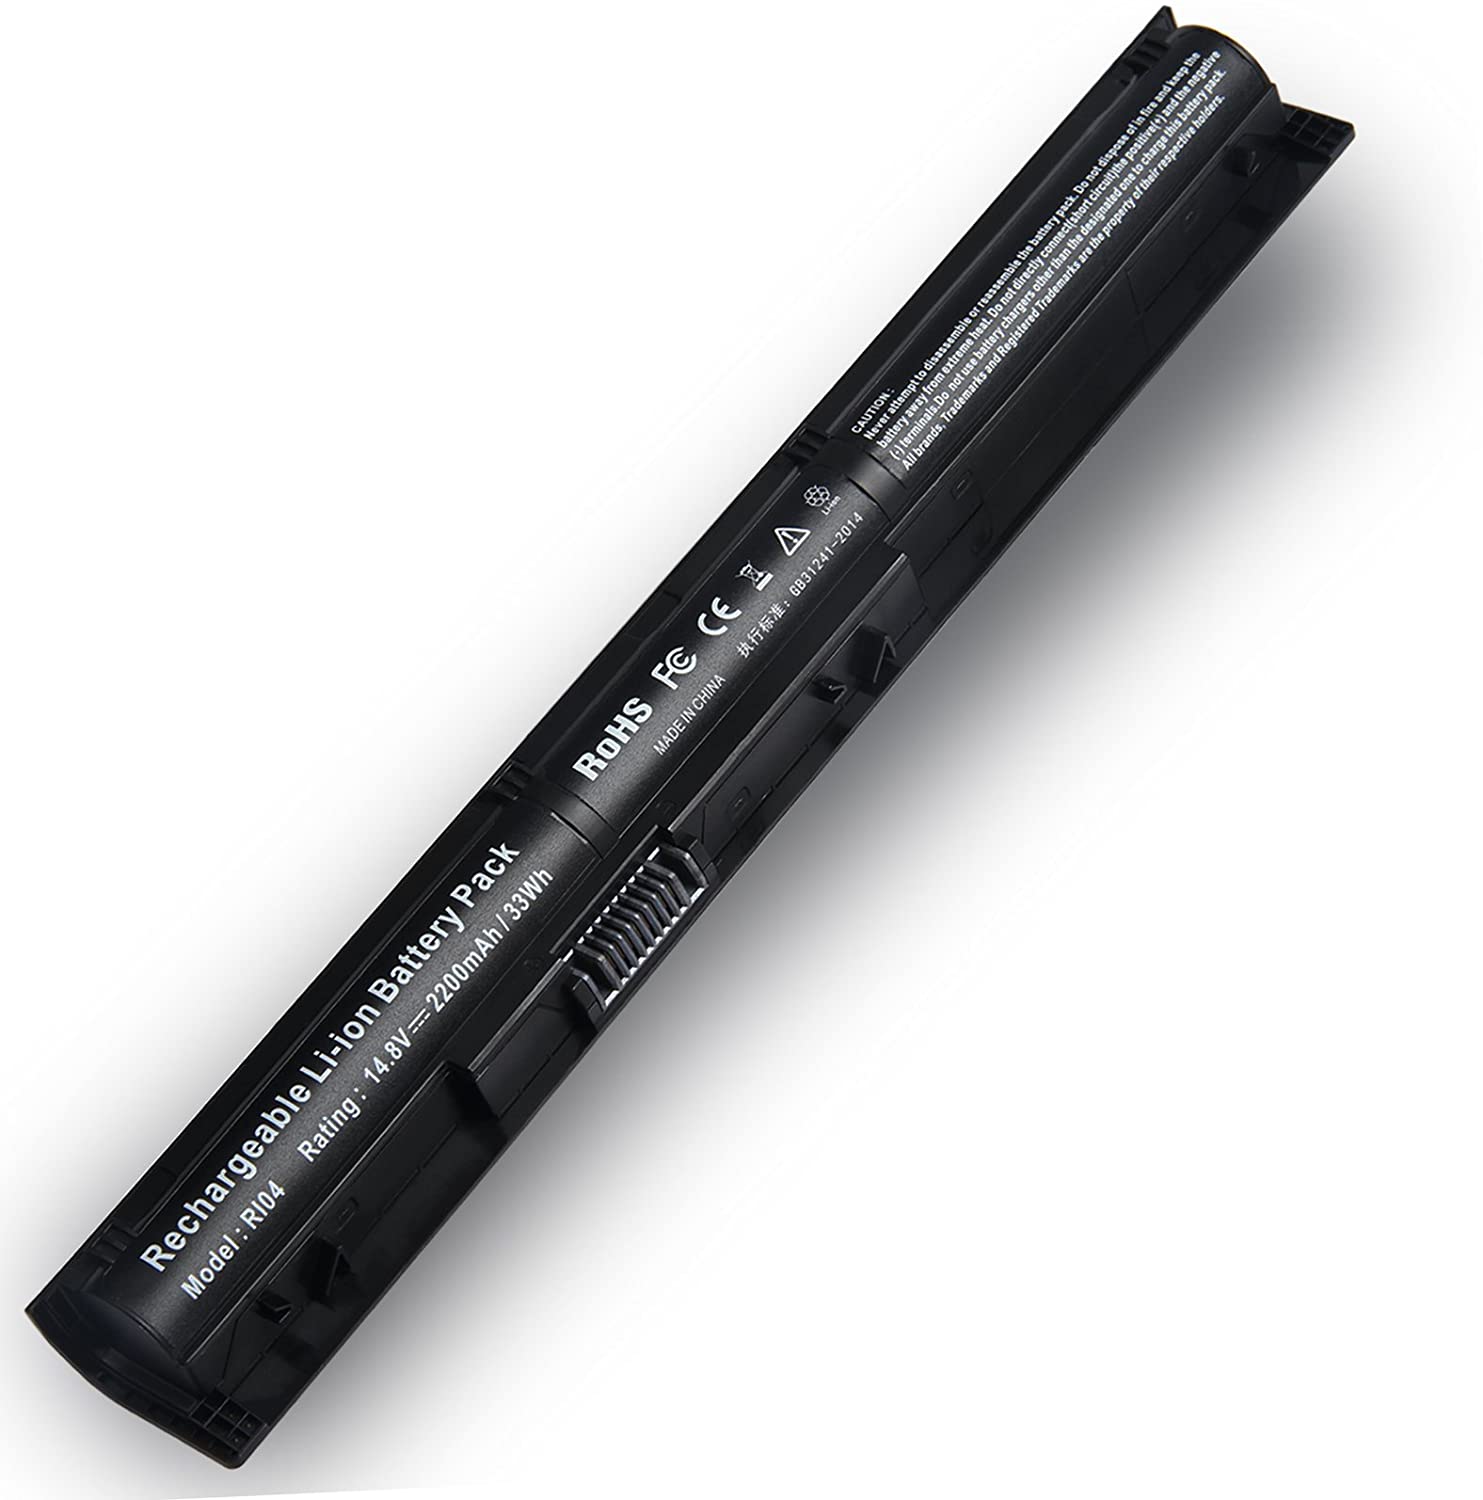 RI04 Battery Compatible with HP Envy 15 HP ProBook 450 455 470 G3 Series, fit R104 RI04 P3G15AA P3G16AA 805294-001 811063-421